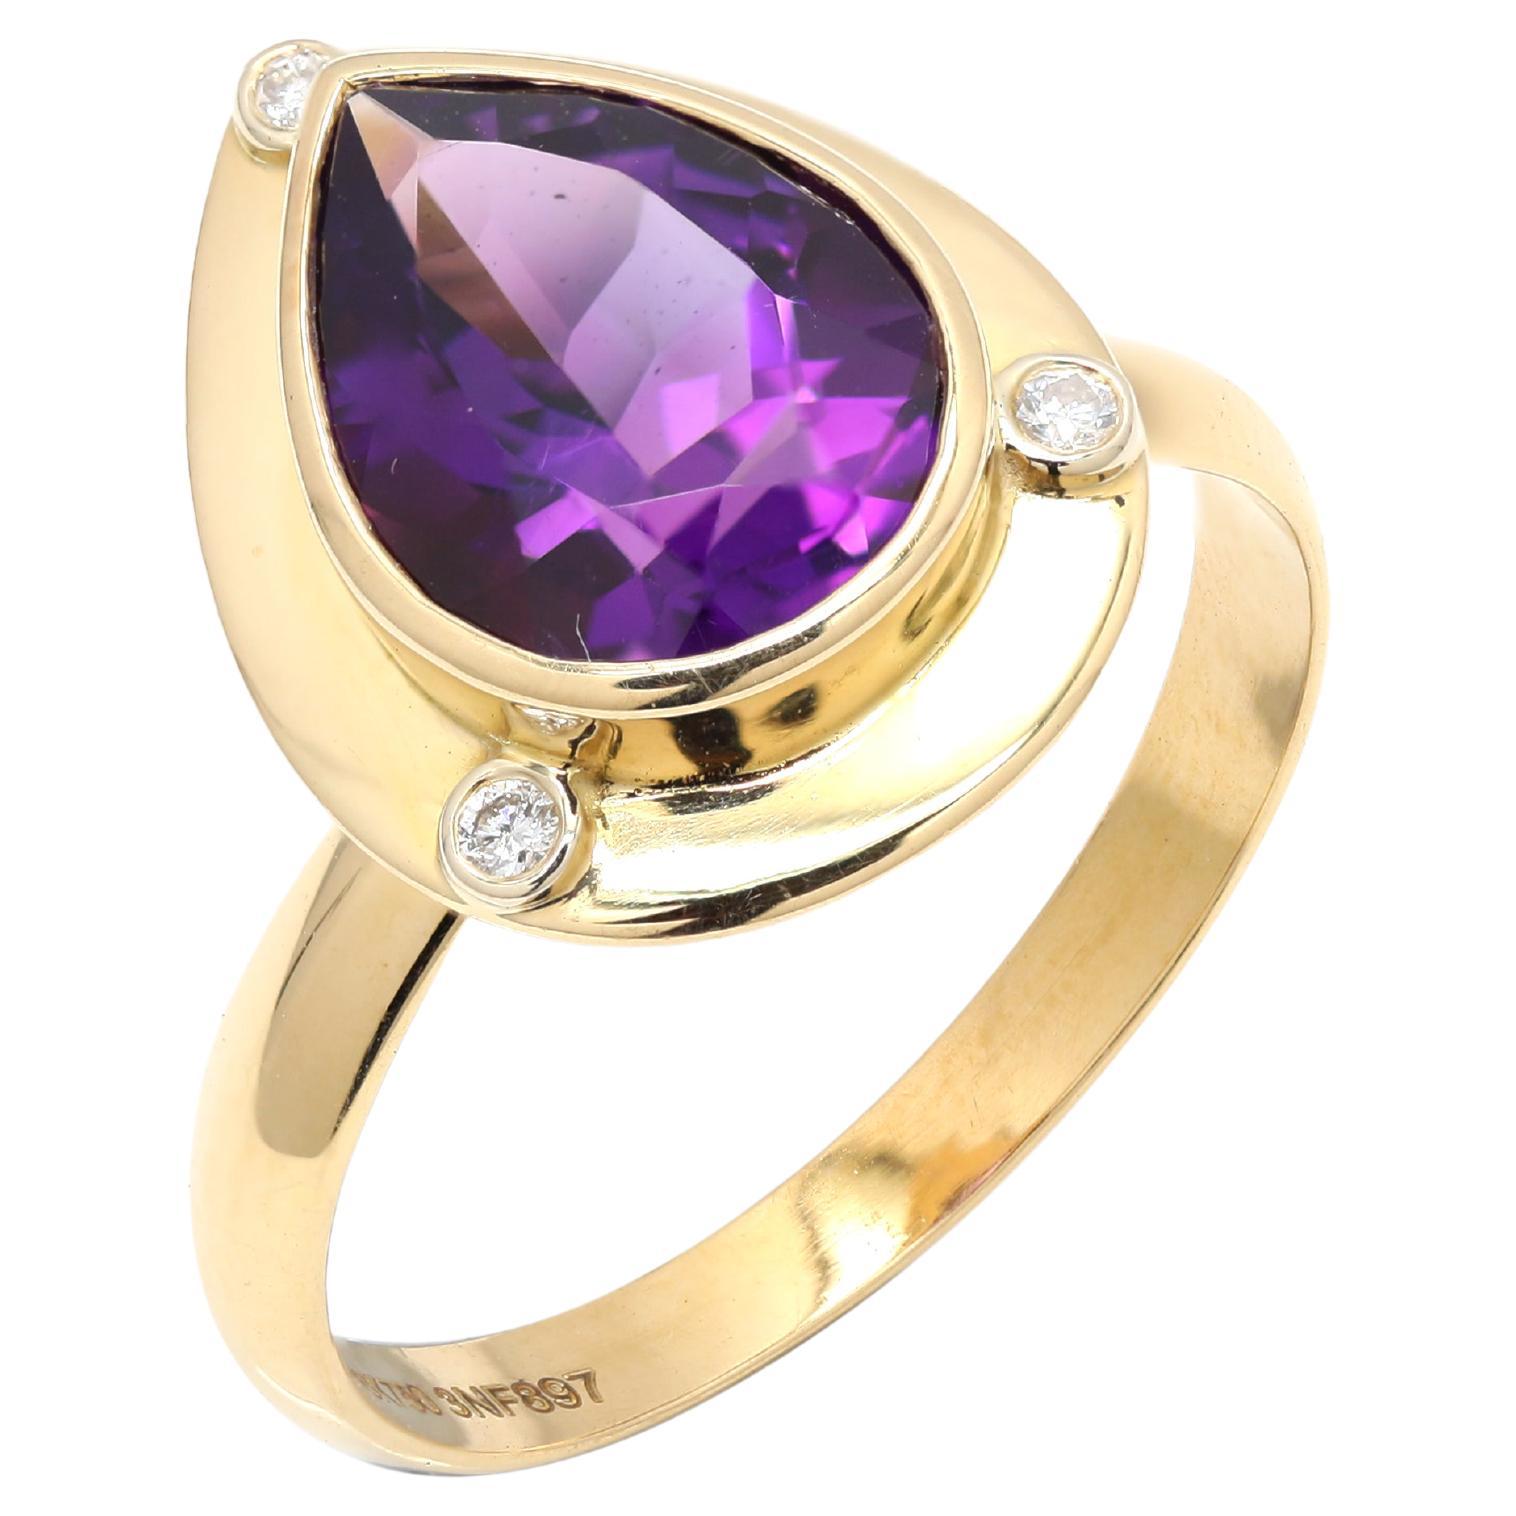 For Sale:  Estelar 2.45ct Amethyst Ring with Diamonds Mounted with 18k Yellow Gold